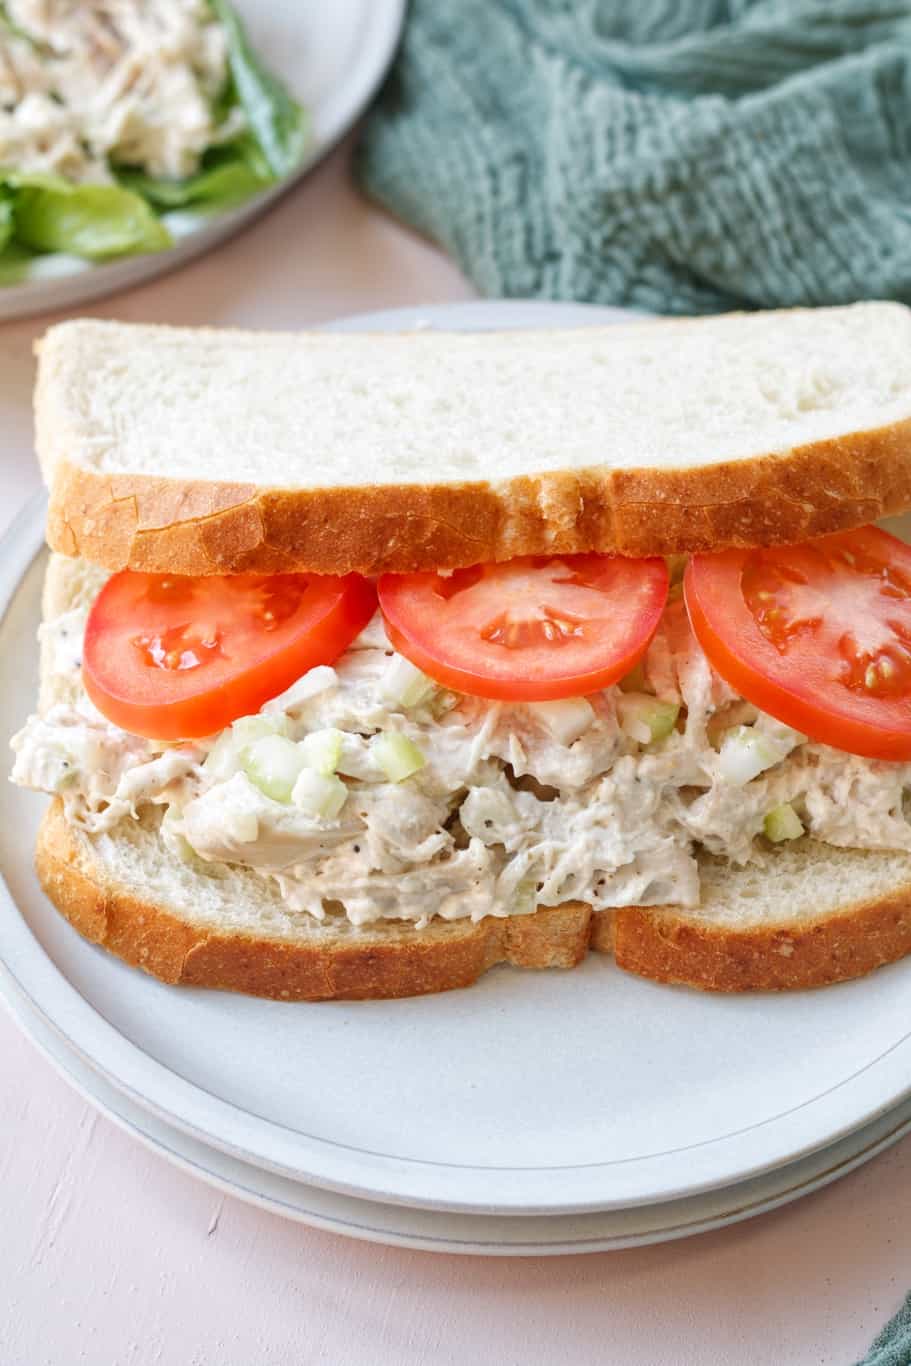 zoes rotisserie chicken salad sandwich with fresh tomatoes on 7-grain bread